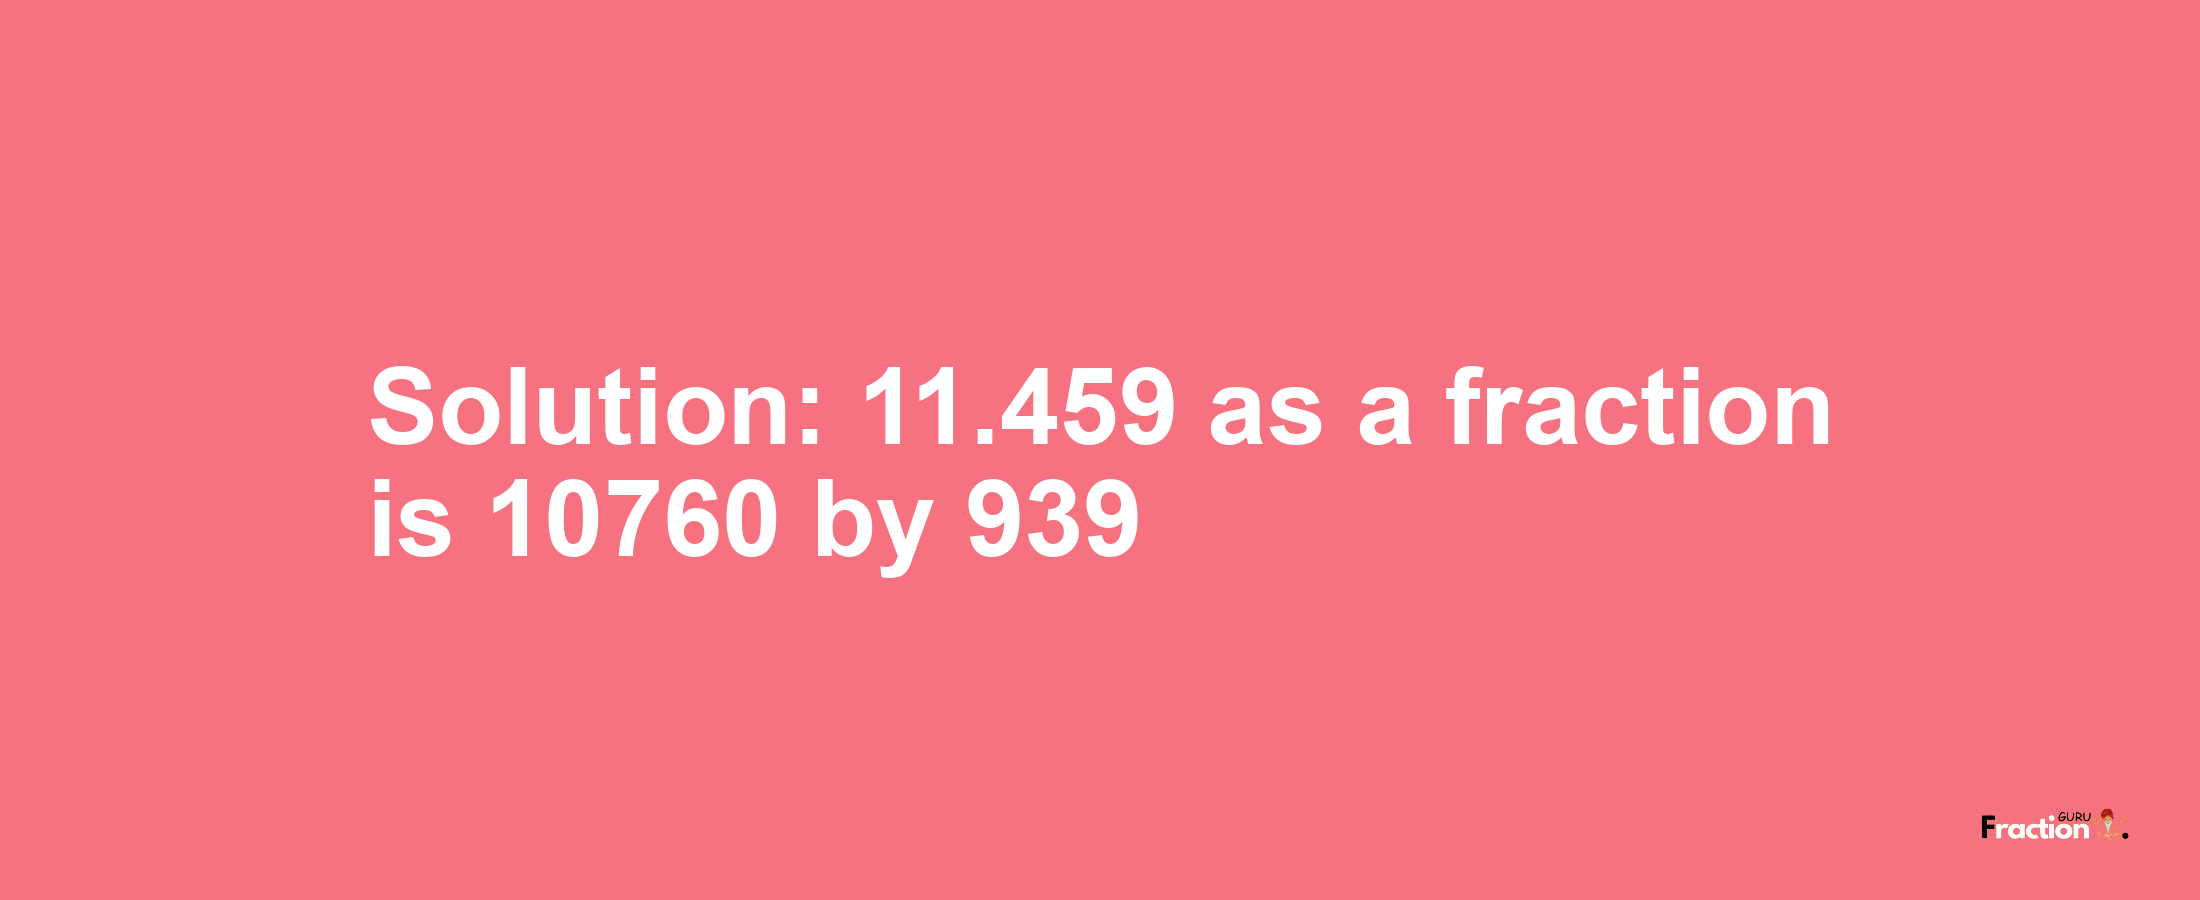 Solution:11.459 as a fraction is 10760/939